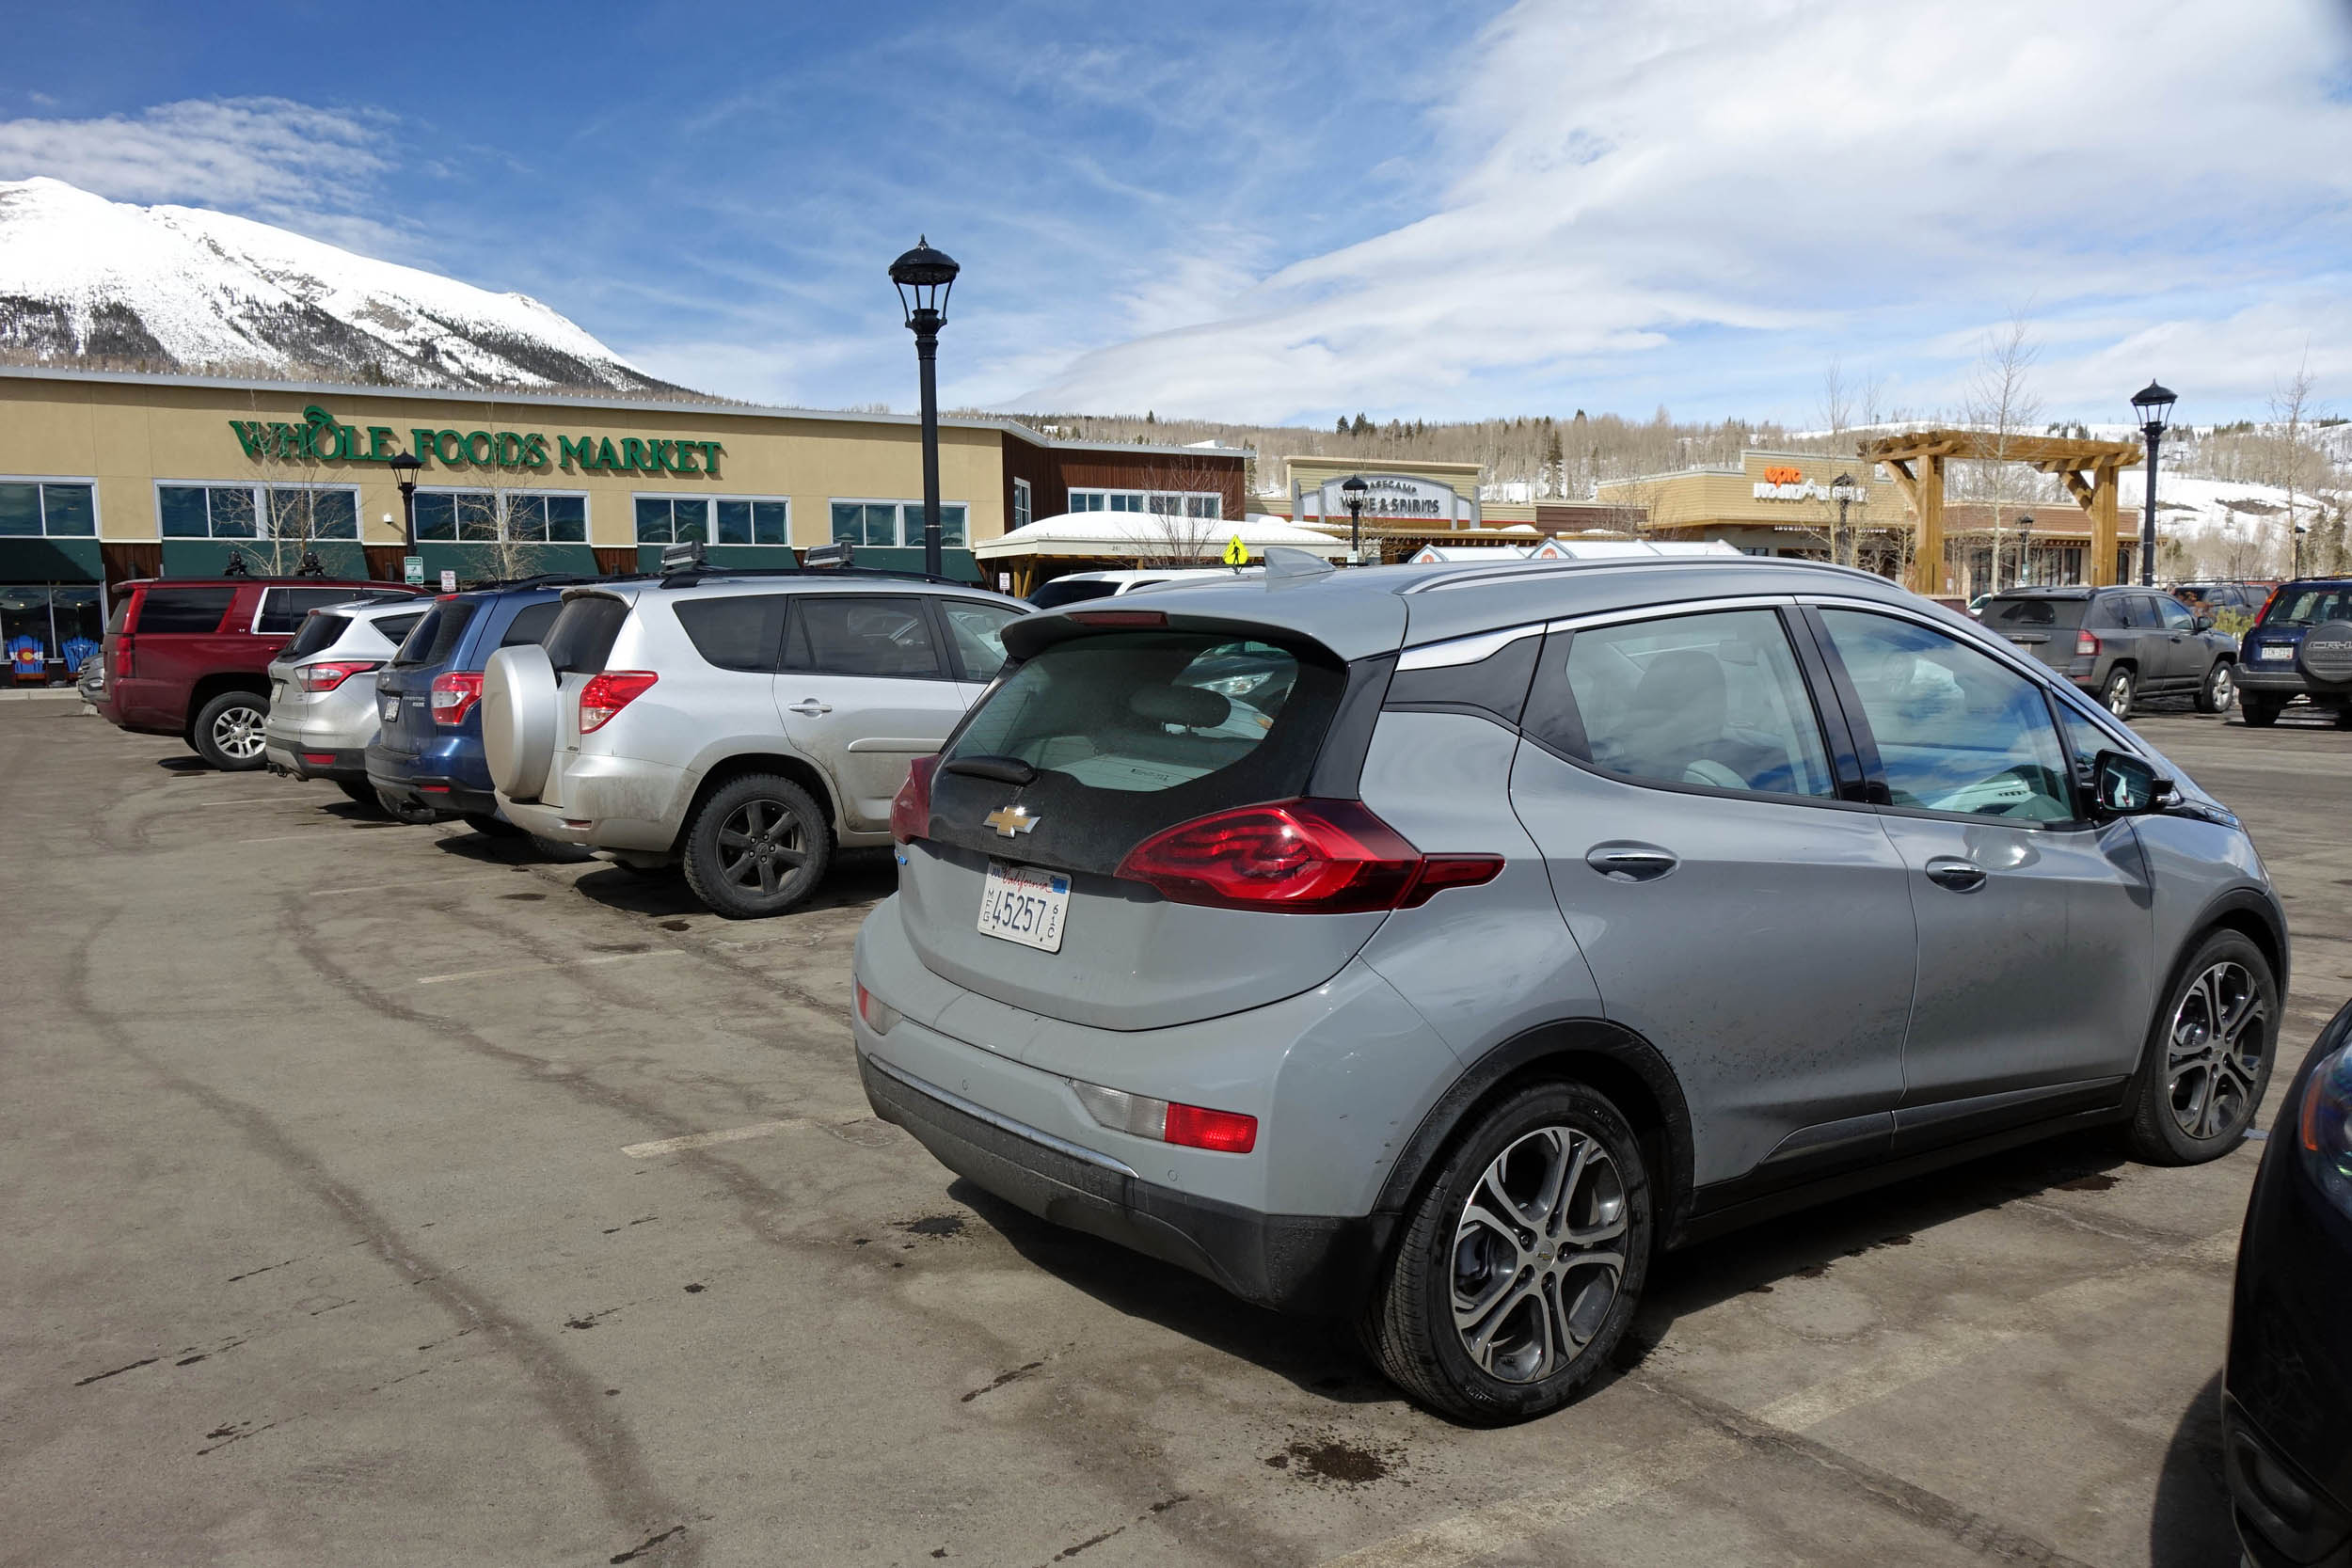 Colorado bill aims to fine ICEholes who block charging spots